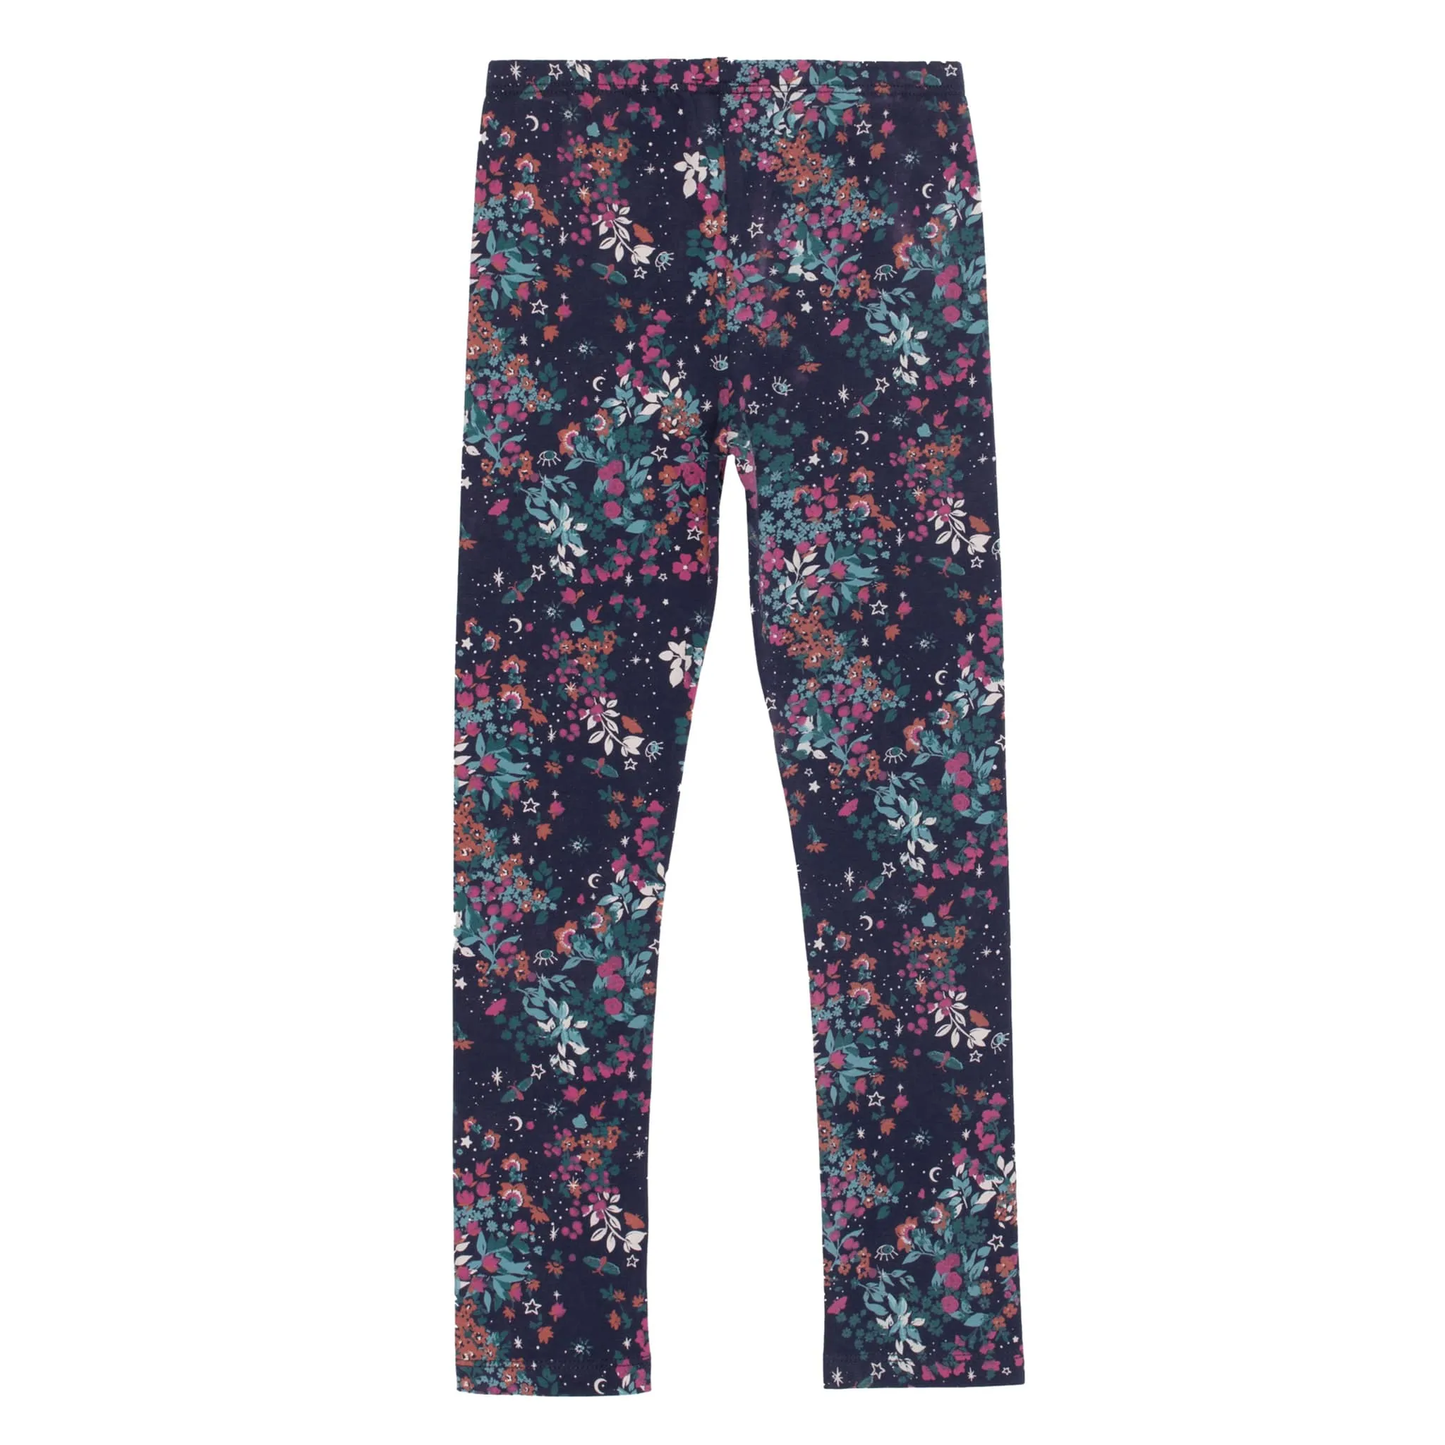 Nanö floral navy leggings for girls 2 to 12 years